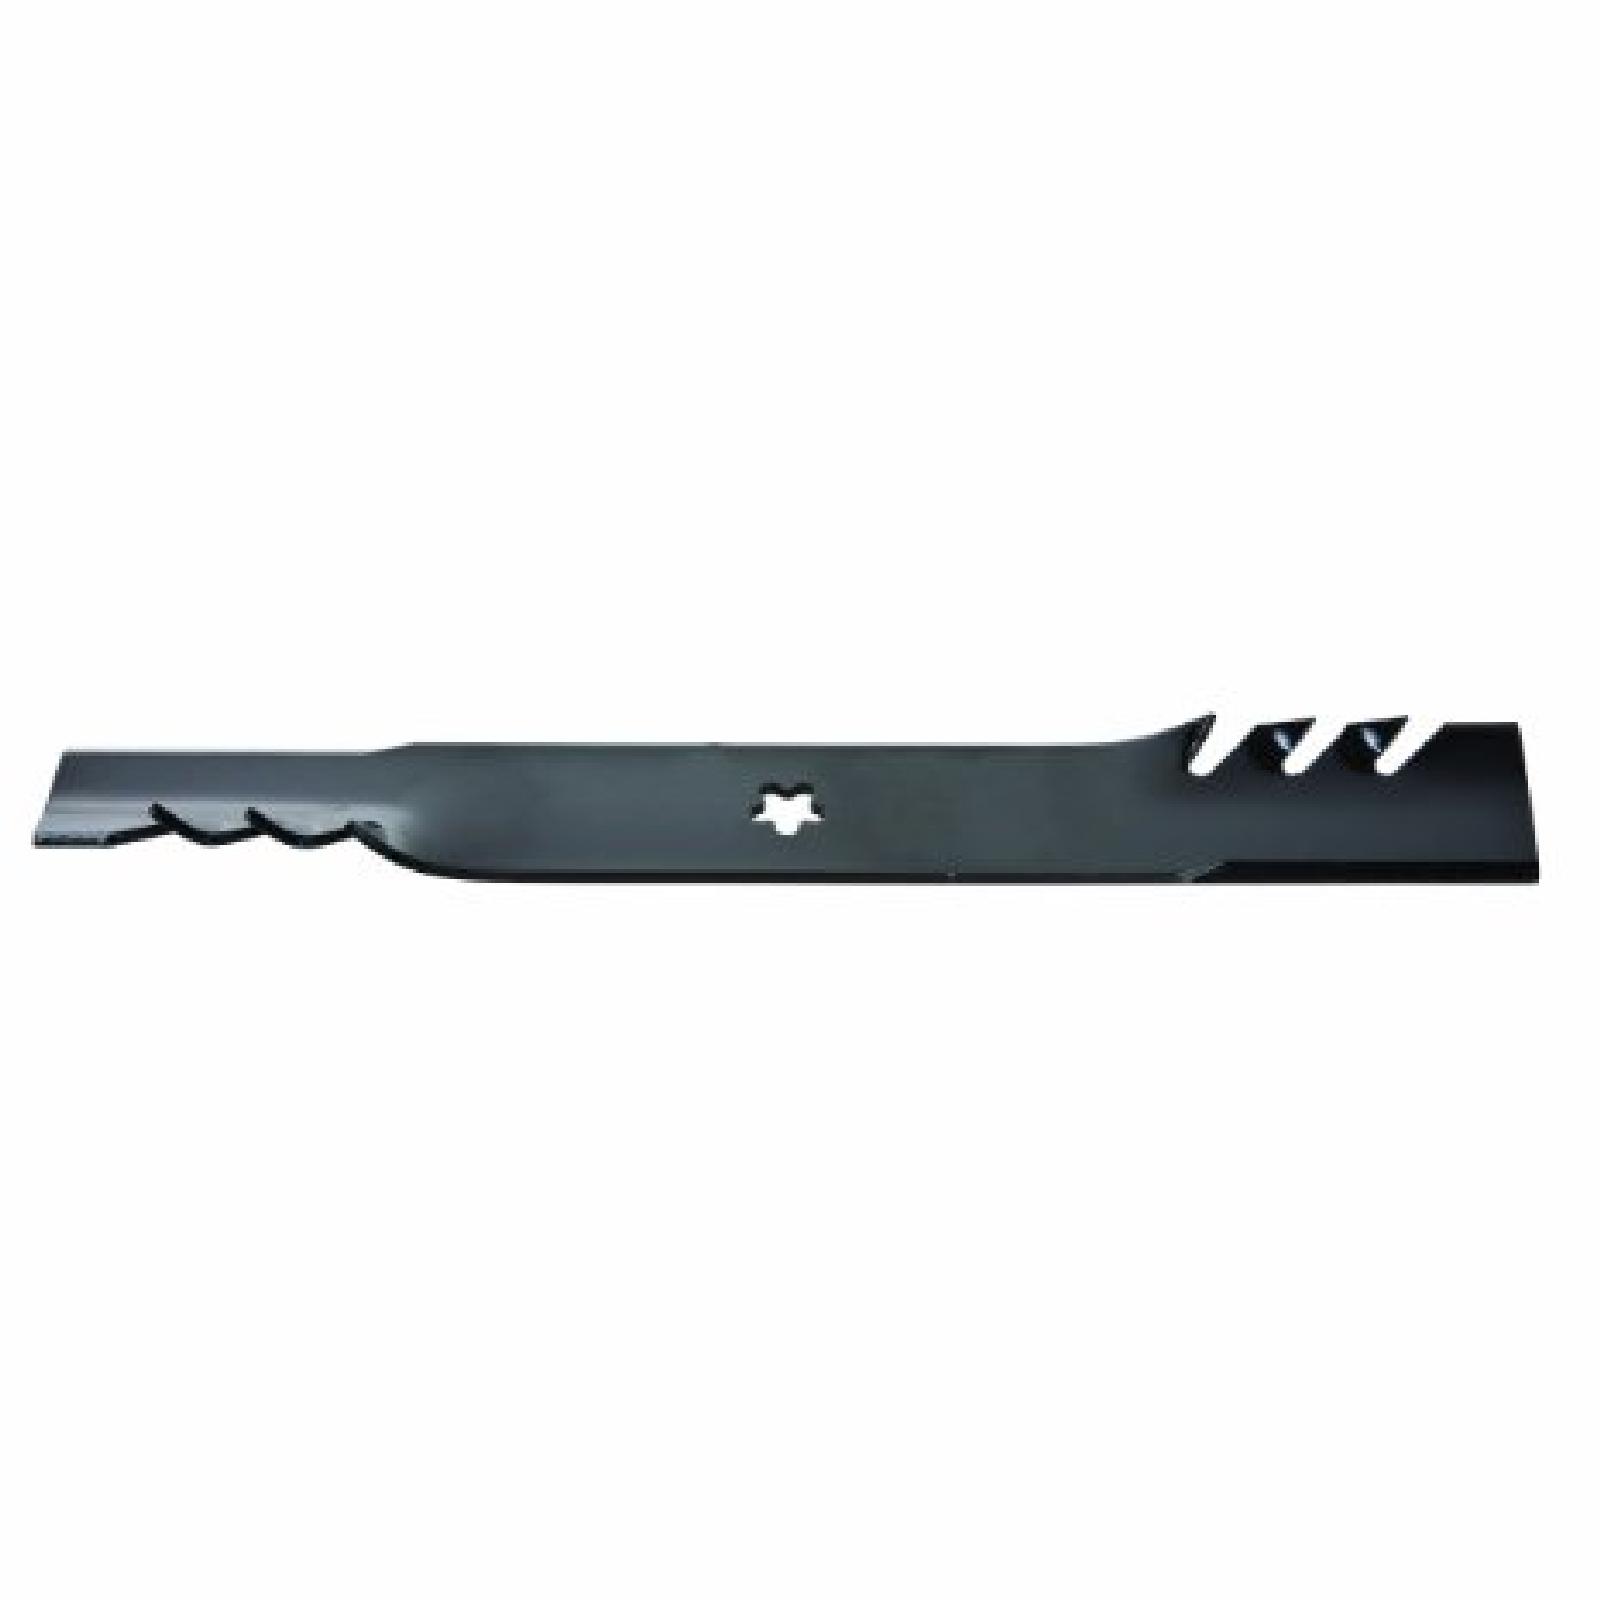 BLADE, AYP, GATOR G5 , 1 part# 595-609 by Oregon - Click Image to Close